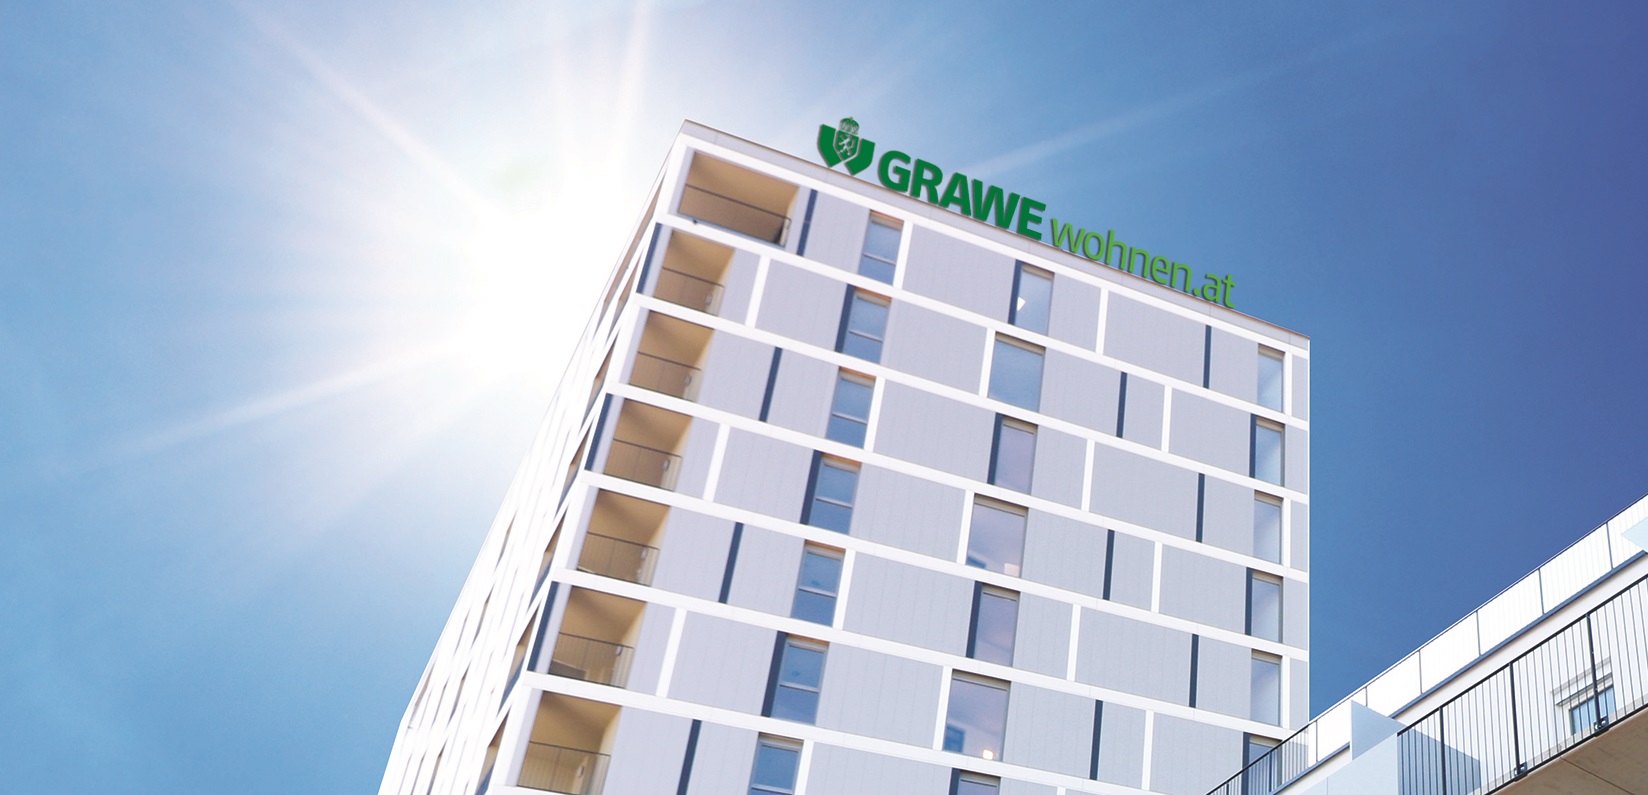 Grawe Immobilien